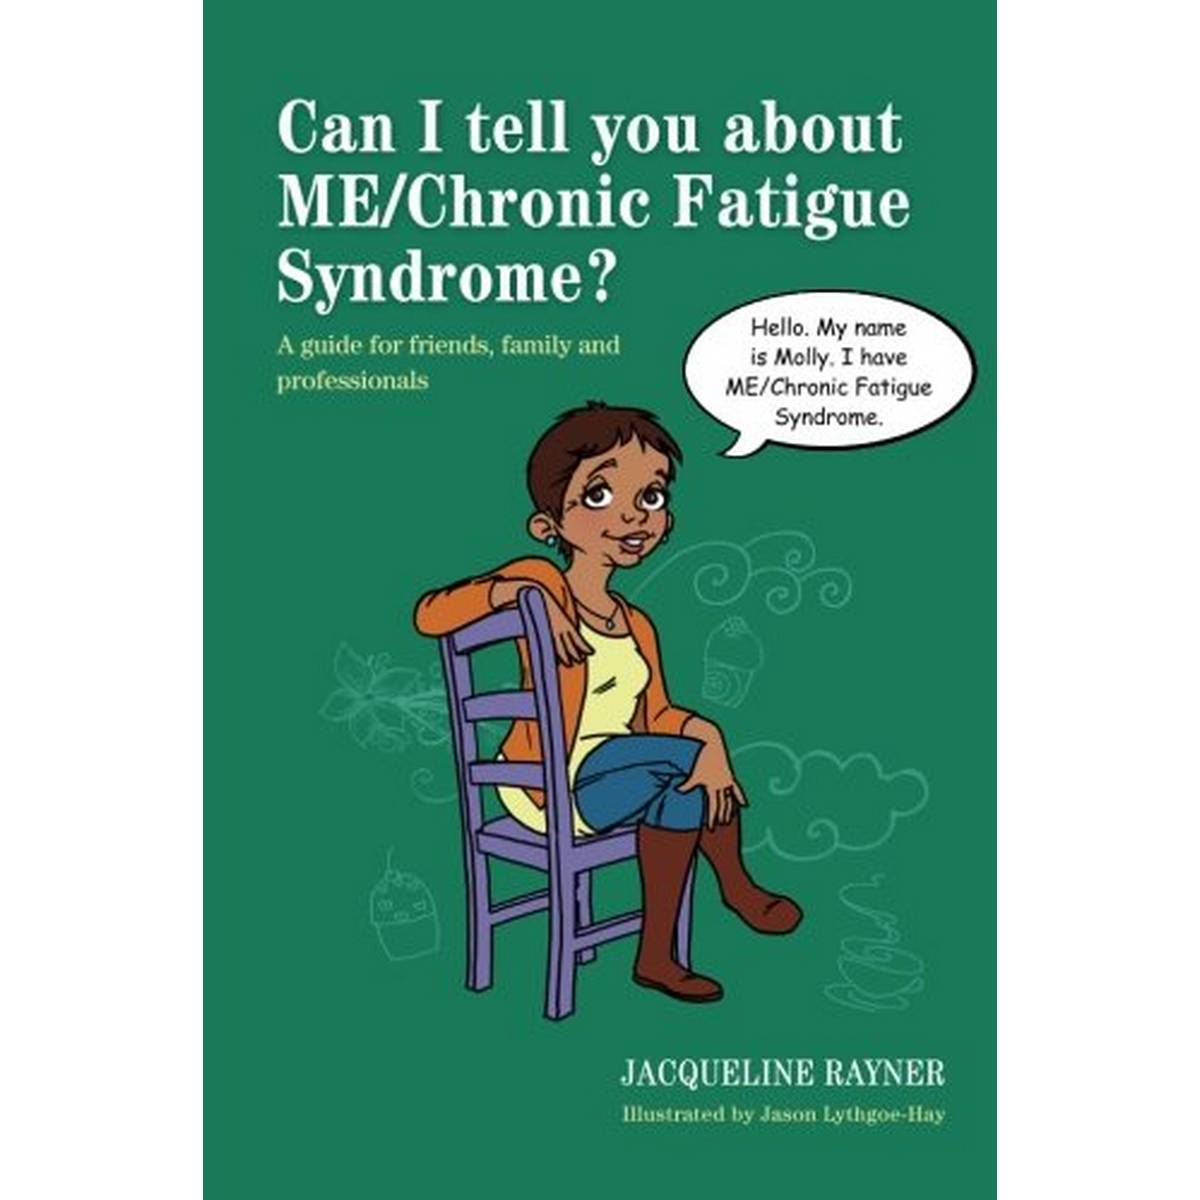 Can I Tell You about Me/Chronic Fatigue Syndrome?